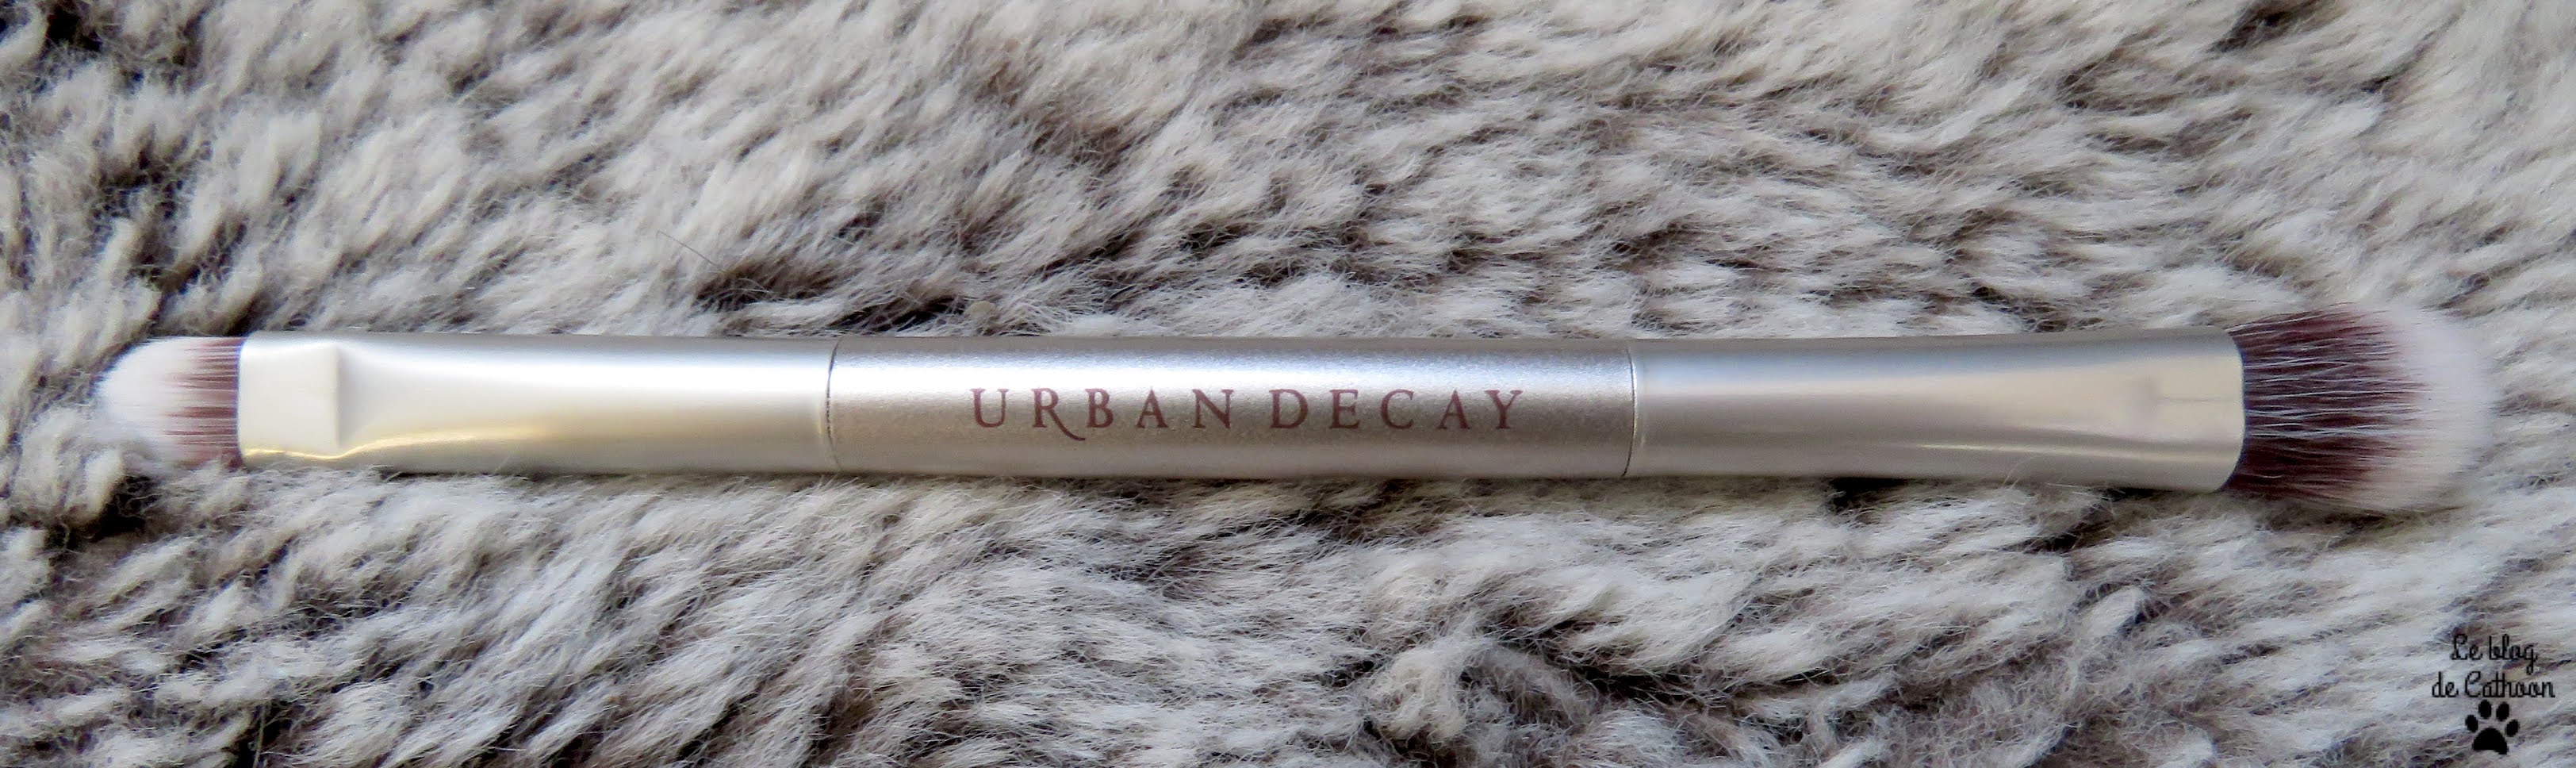 Stoned Vibes Urban Decay